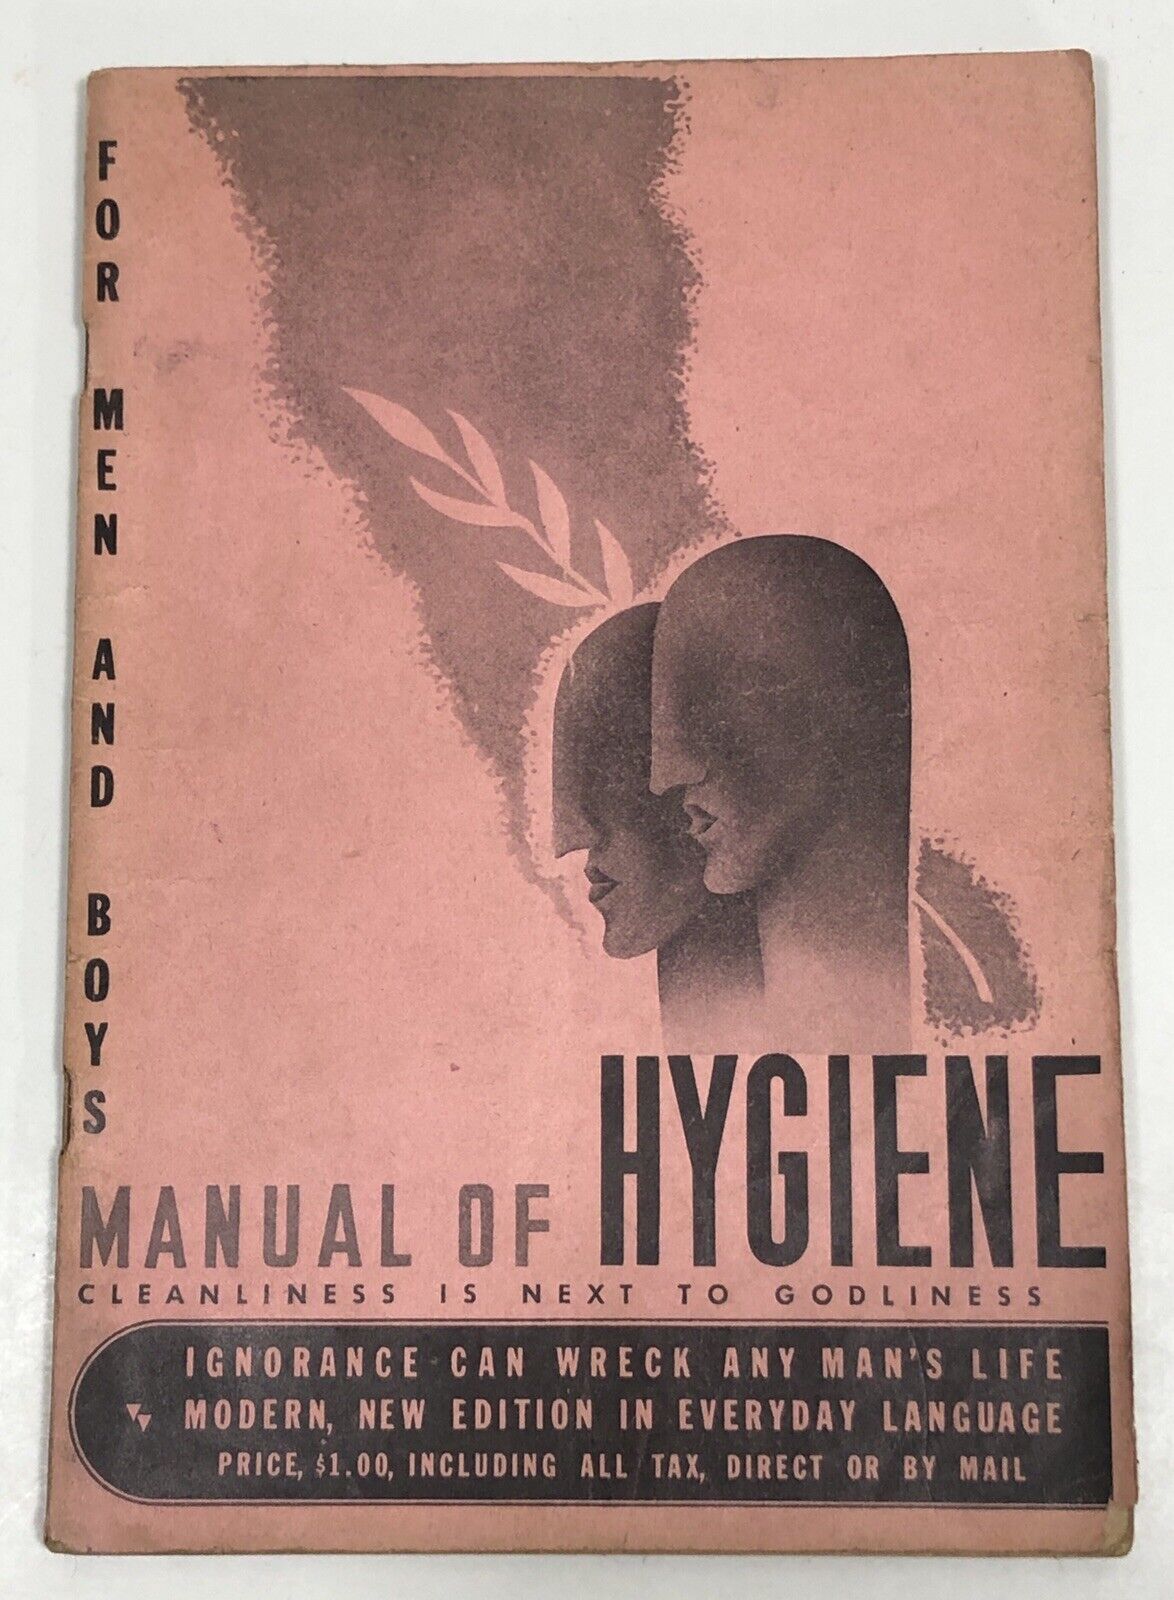 Manual of Hygiene Men & Boys Cleanliness is Next to Godliness 1945 M.A. Horn ed.